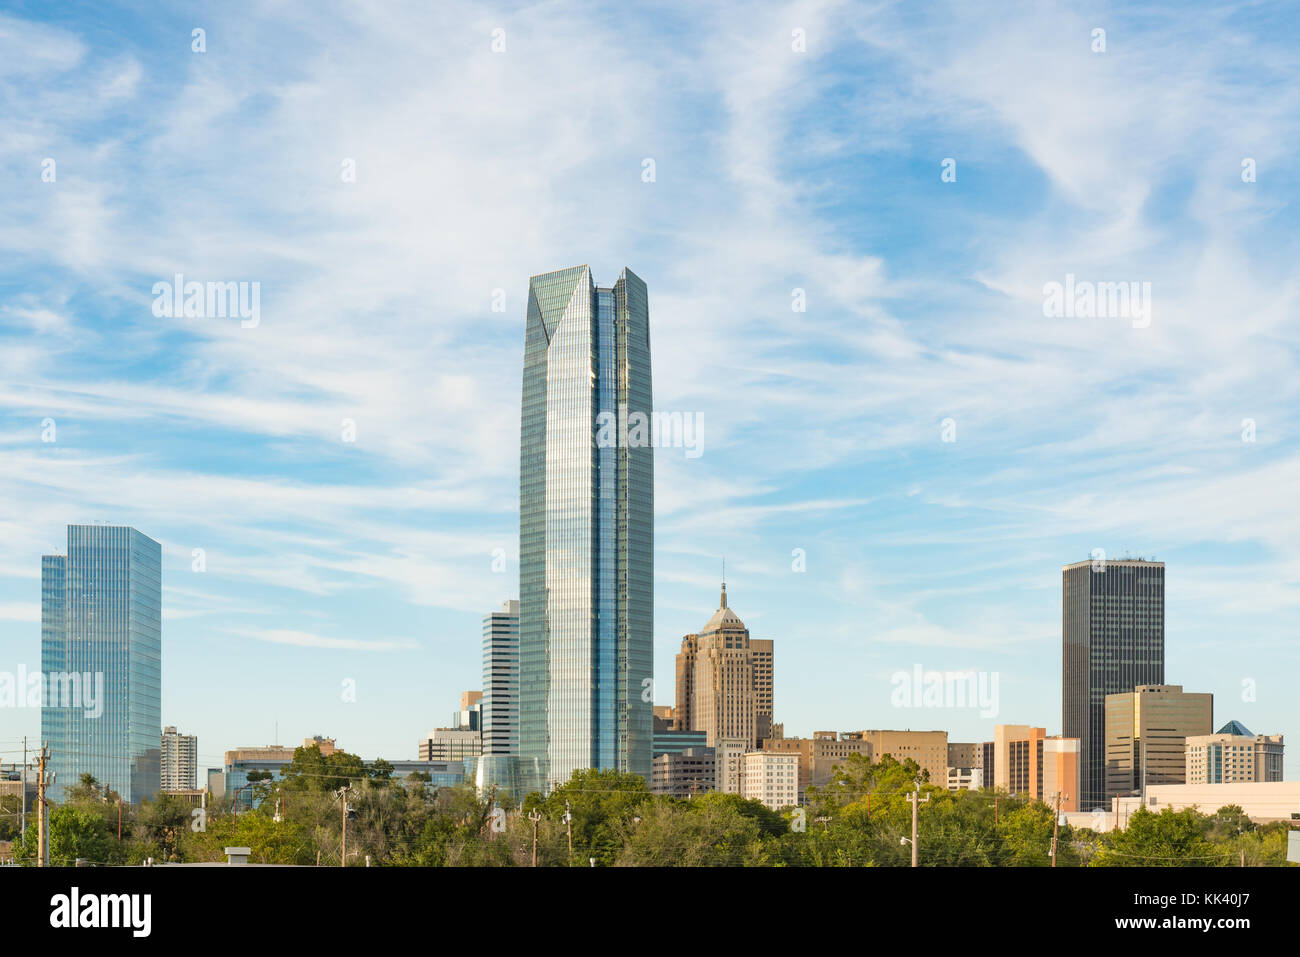 Skyline of Oklahoma City, OK during the day with cloudly sky Stock Photo